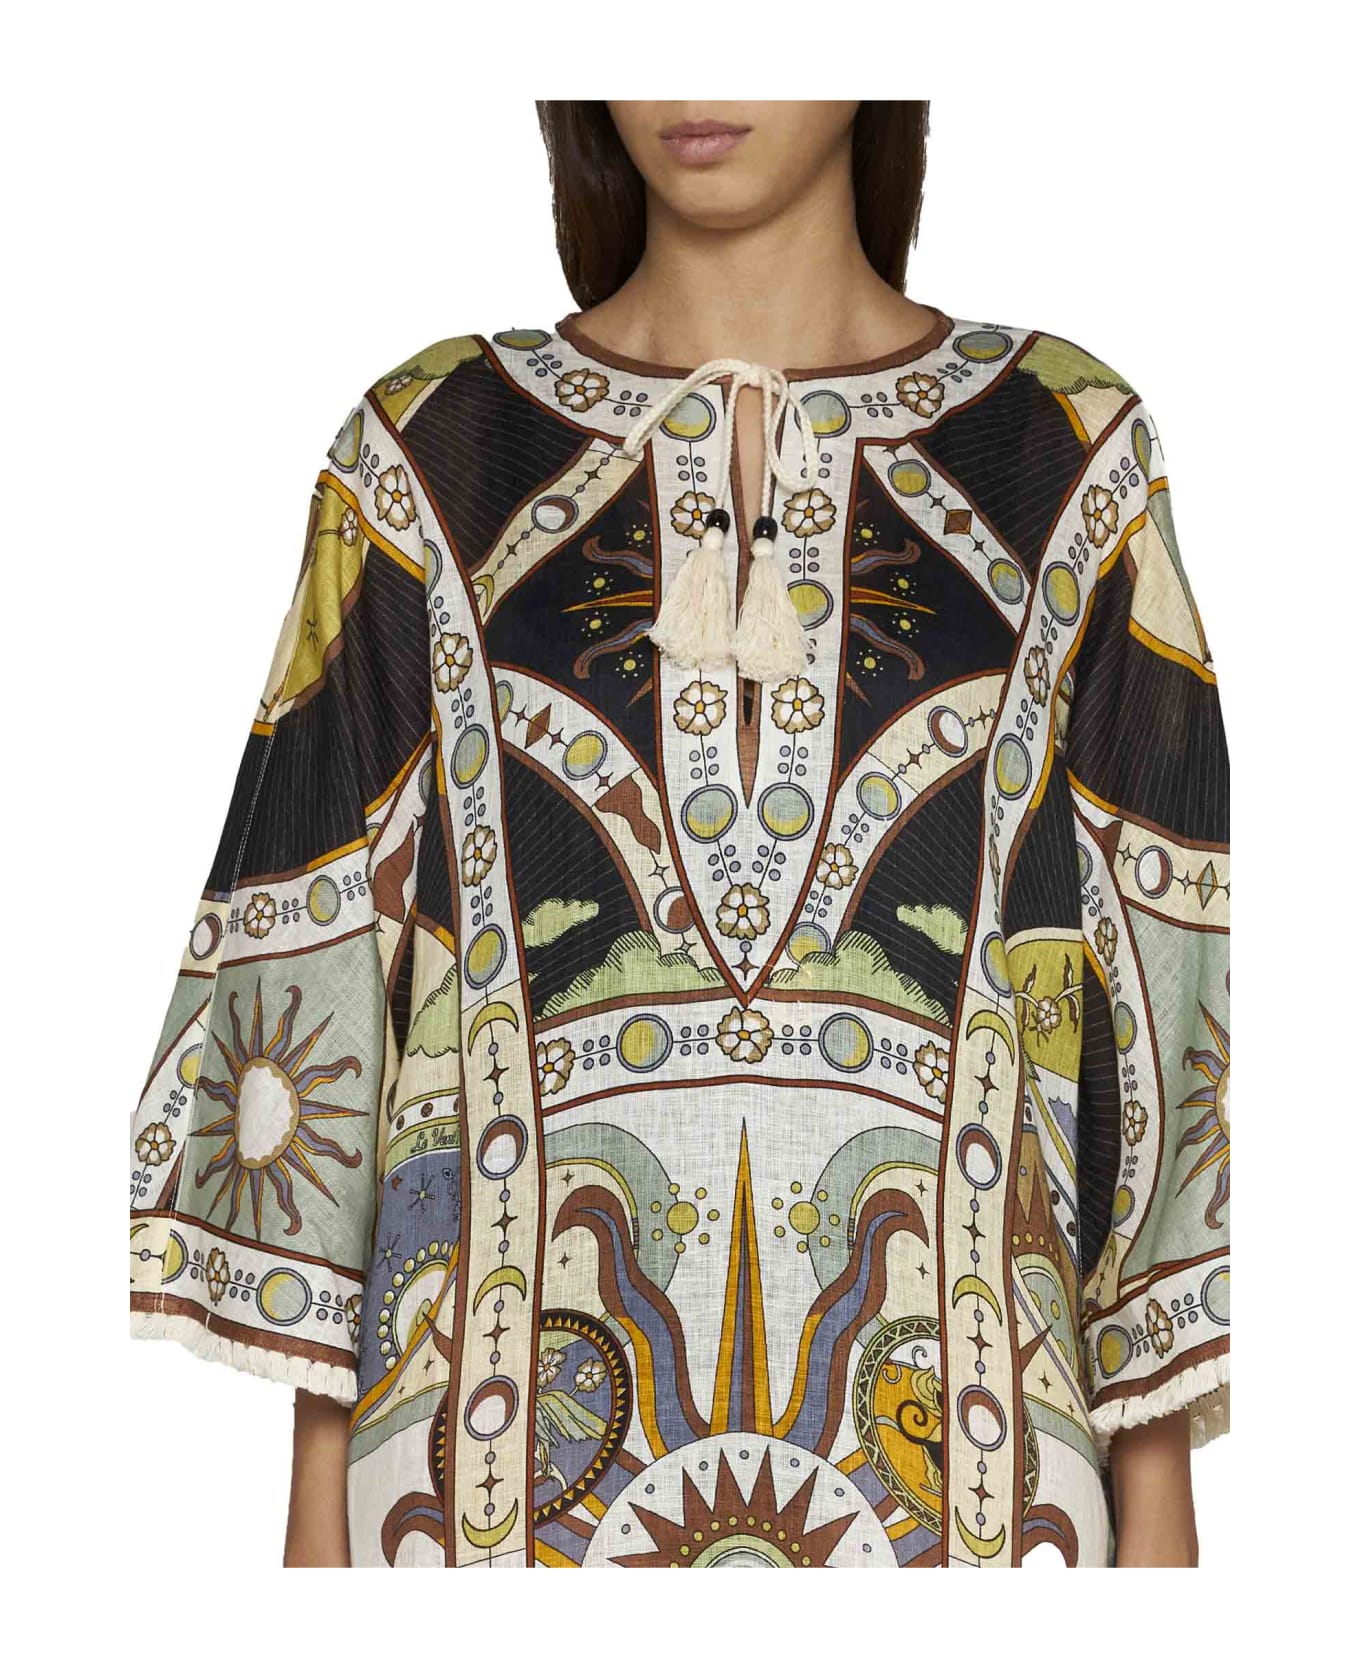 Tory Burch Kaftan With All-over Graphic Print In Linen - Navy sundial